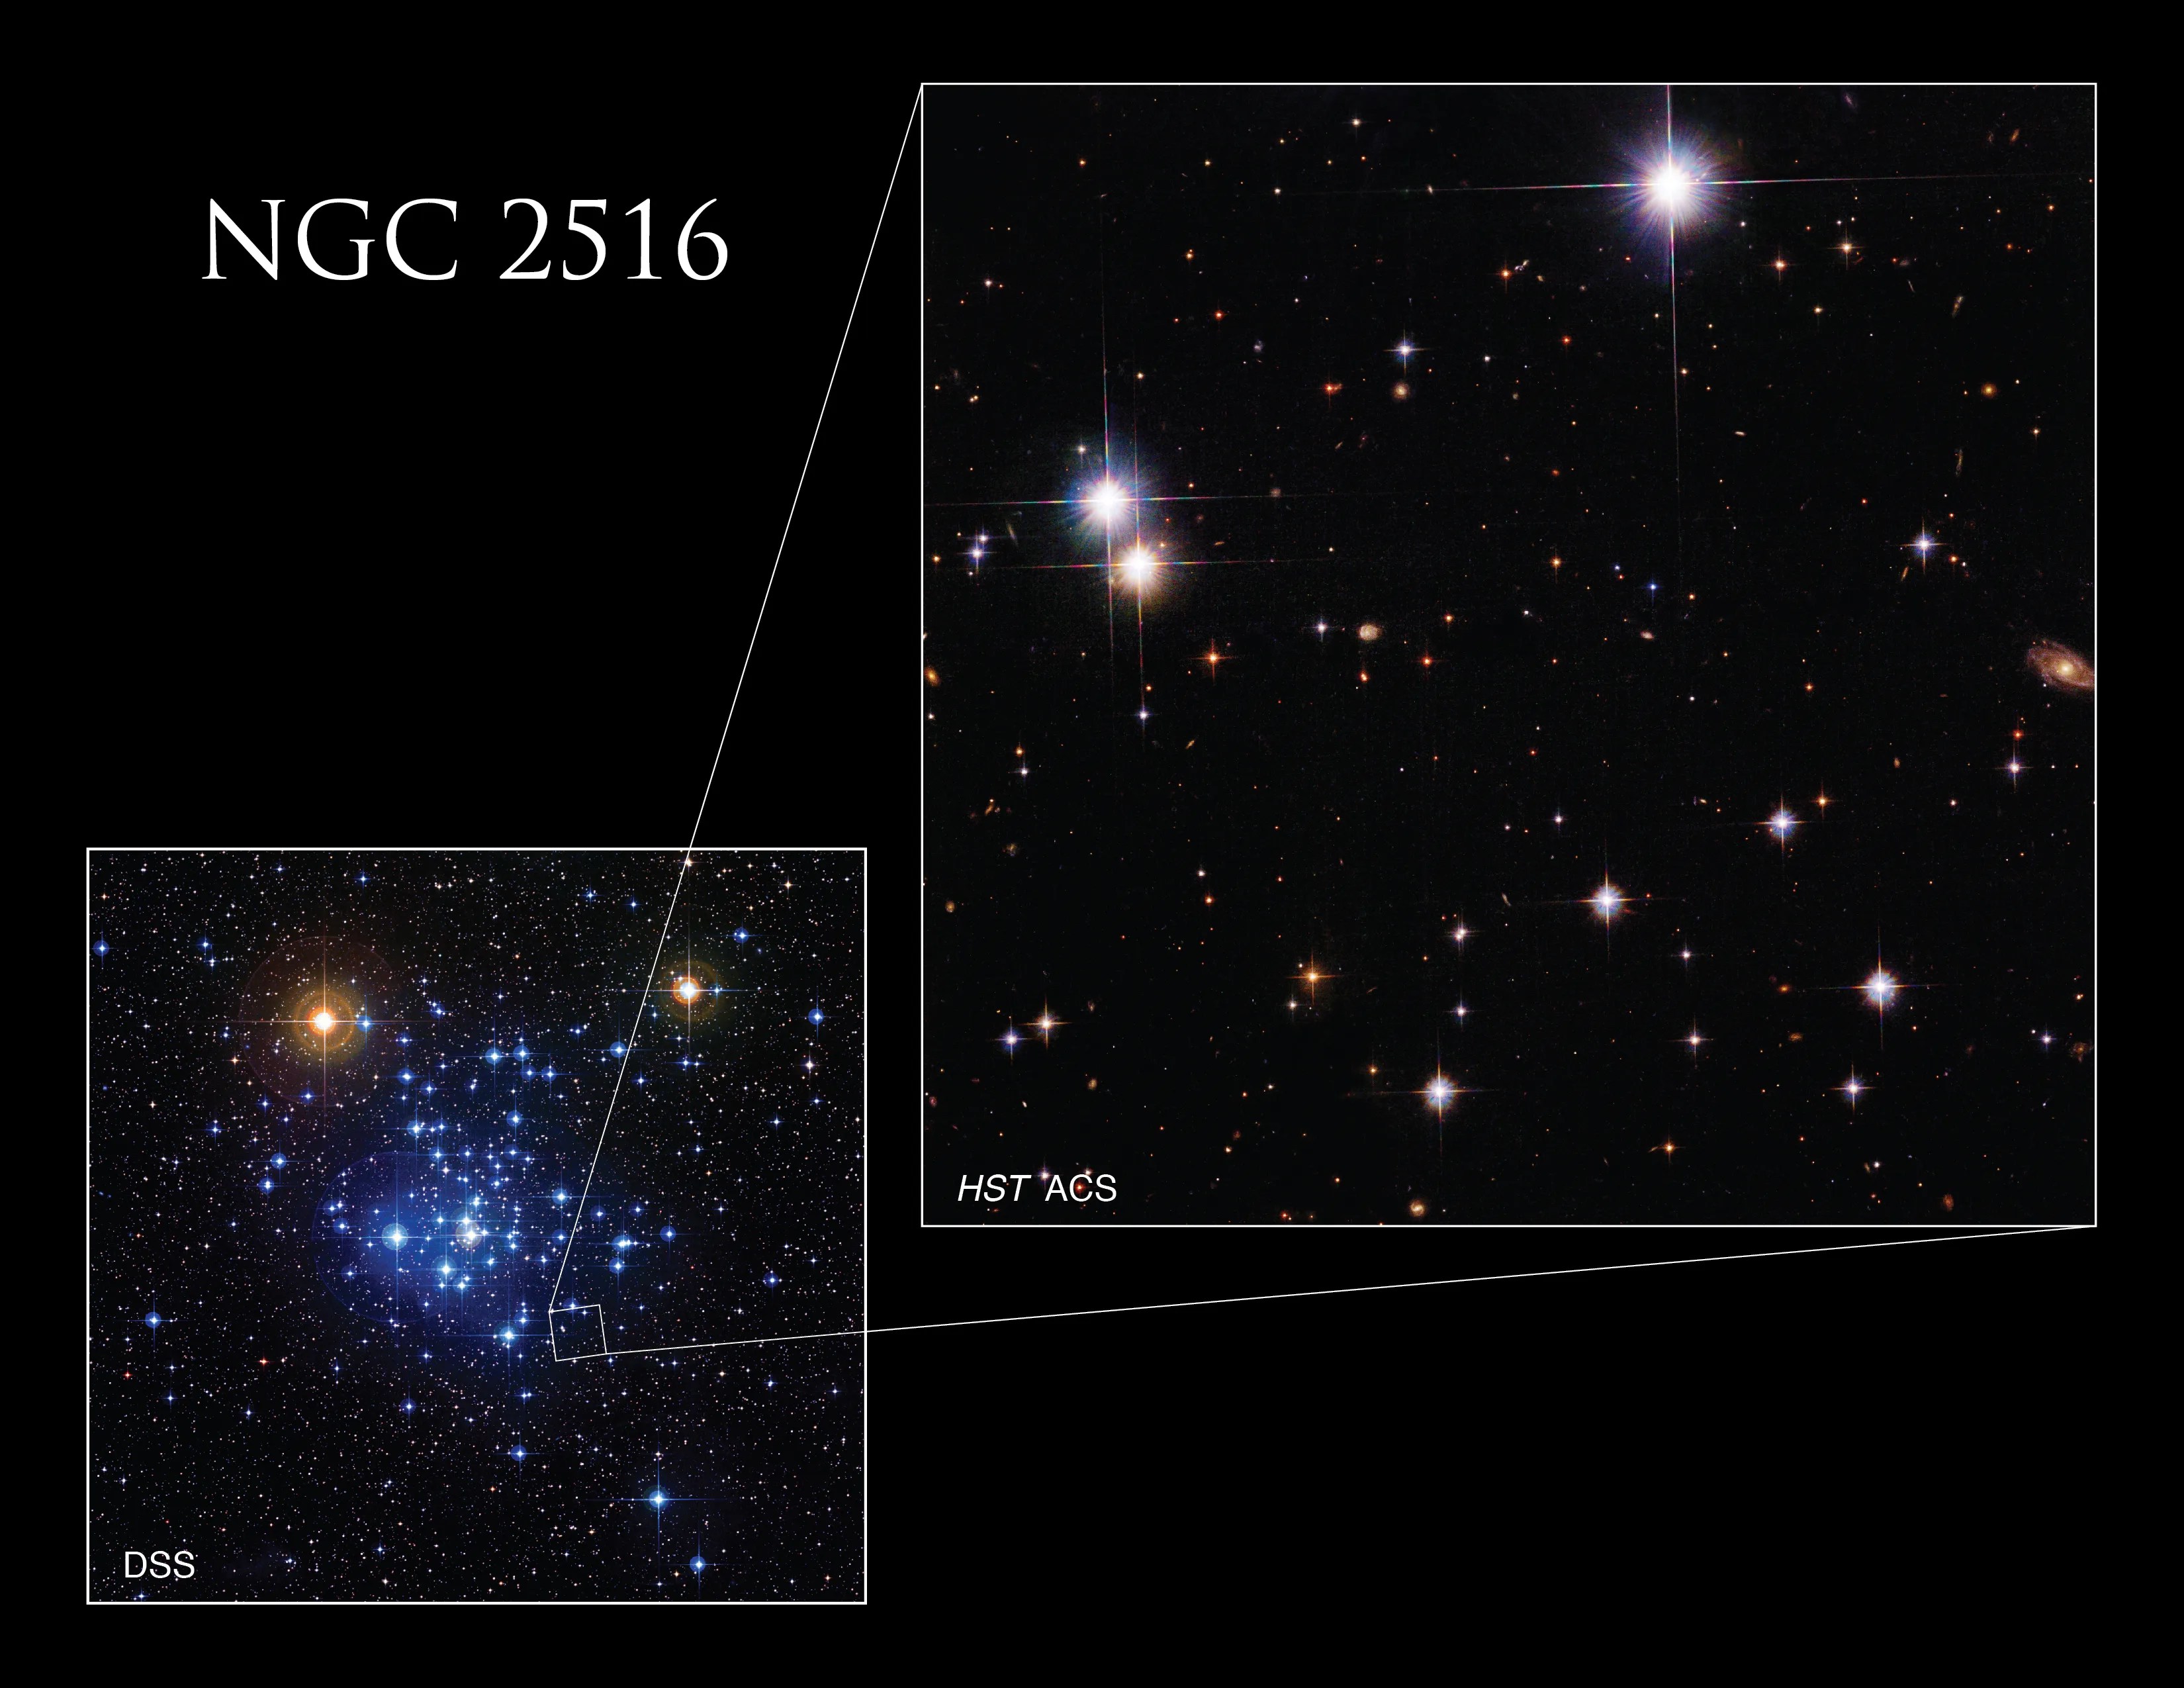 To the left is a cluster of blue stars against a black background. Two bright orange stars are near the top of the image. A callout box at the edge of the cluster shows the location of the Hubble image (shown at the right), which features scattered stars including several large bright ones.